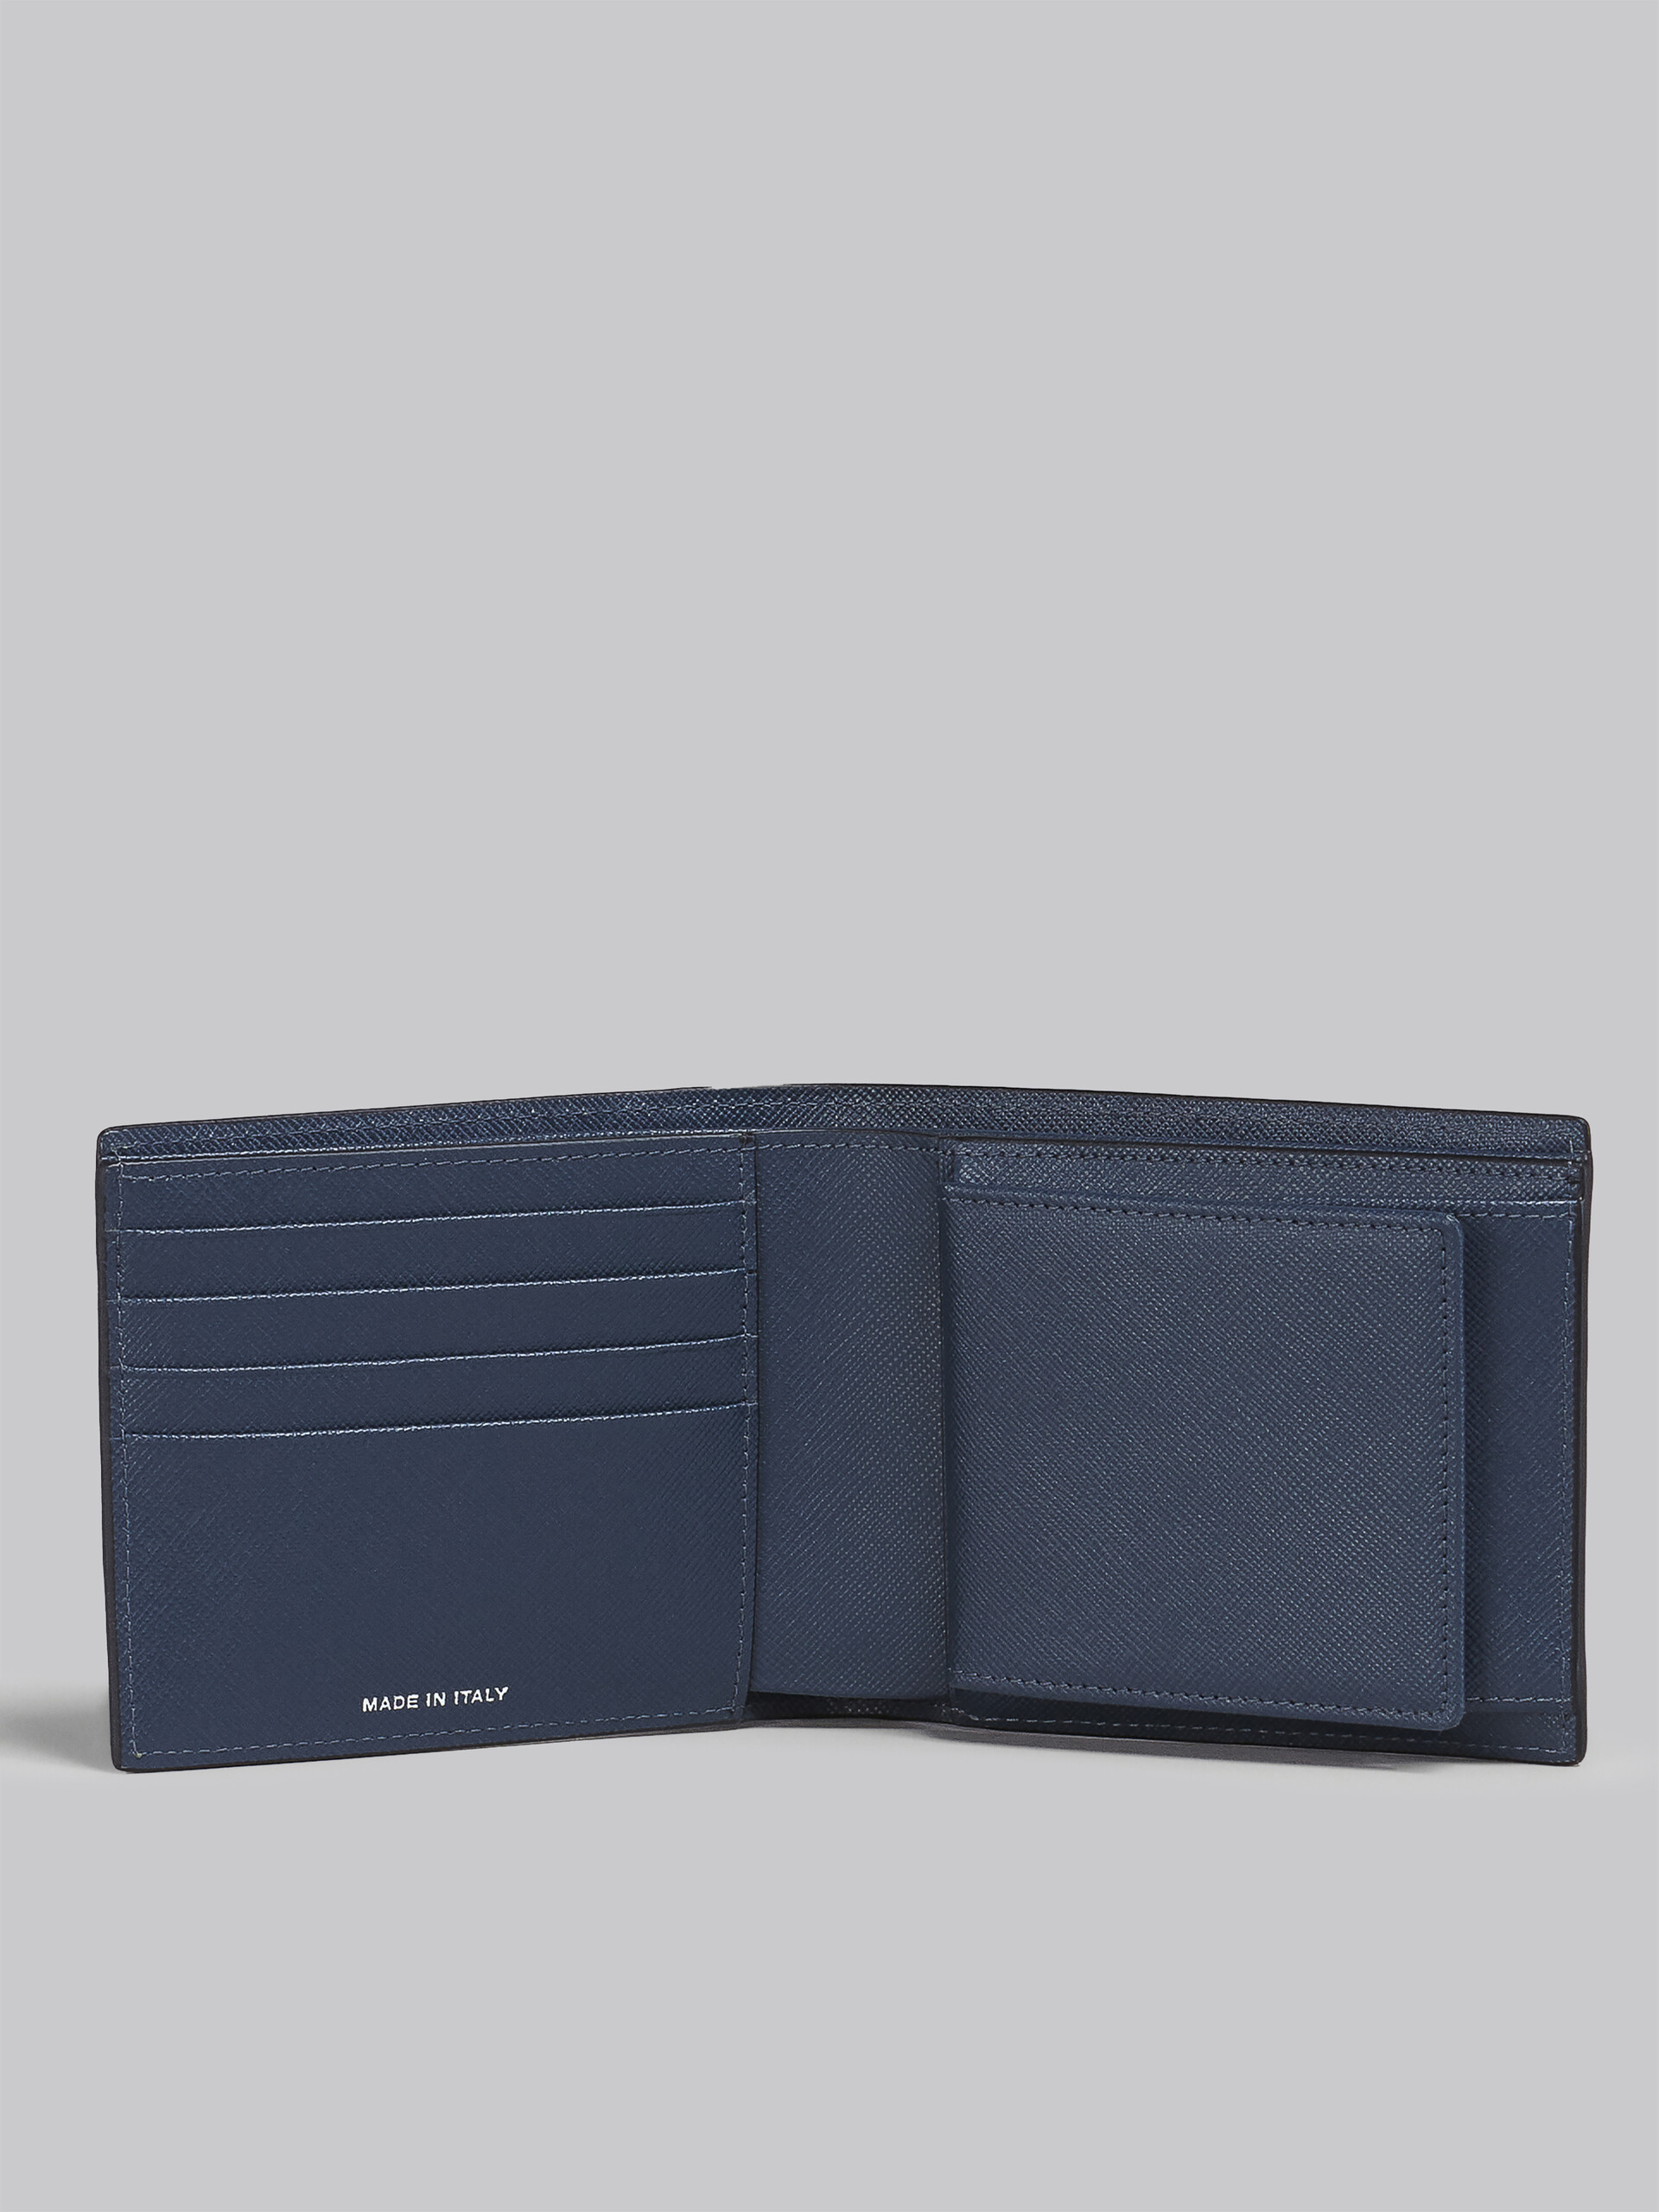 Black green and blue saffiano leather bi-fold wallet - Wallets - Image 2